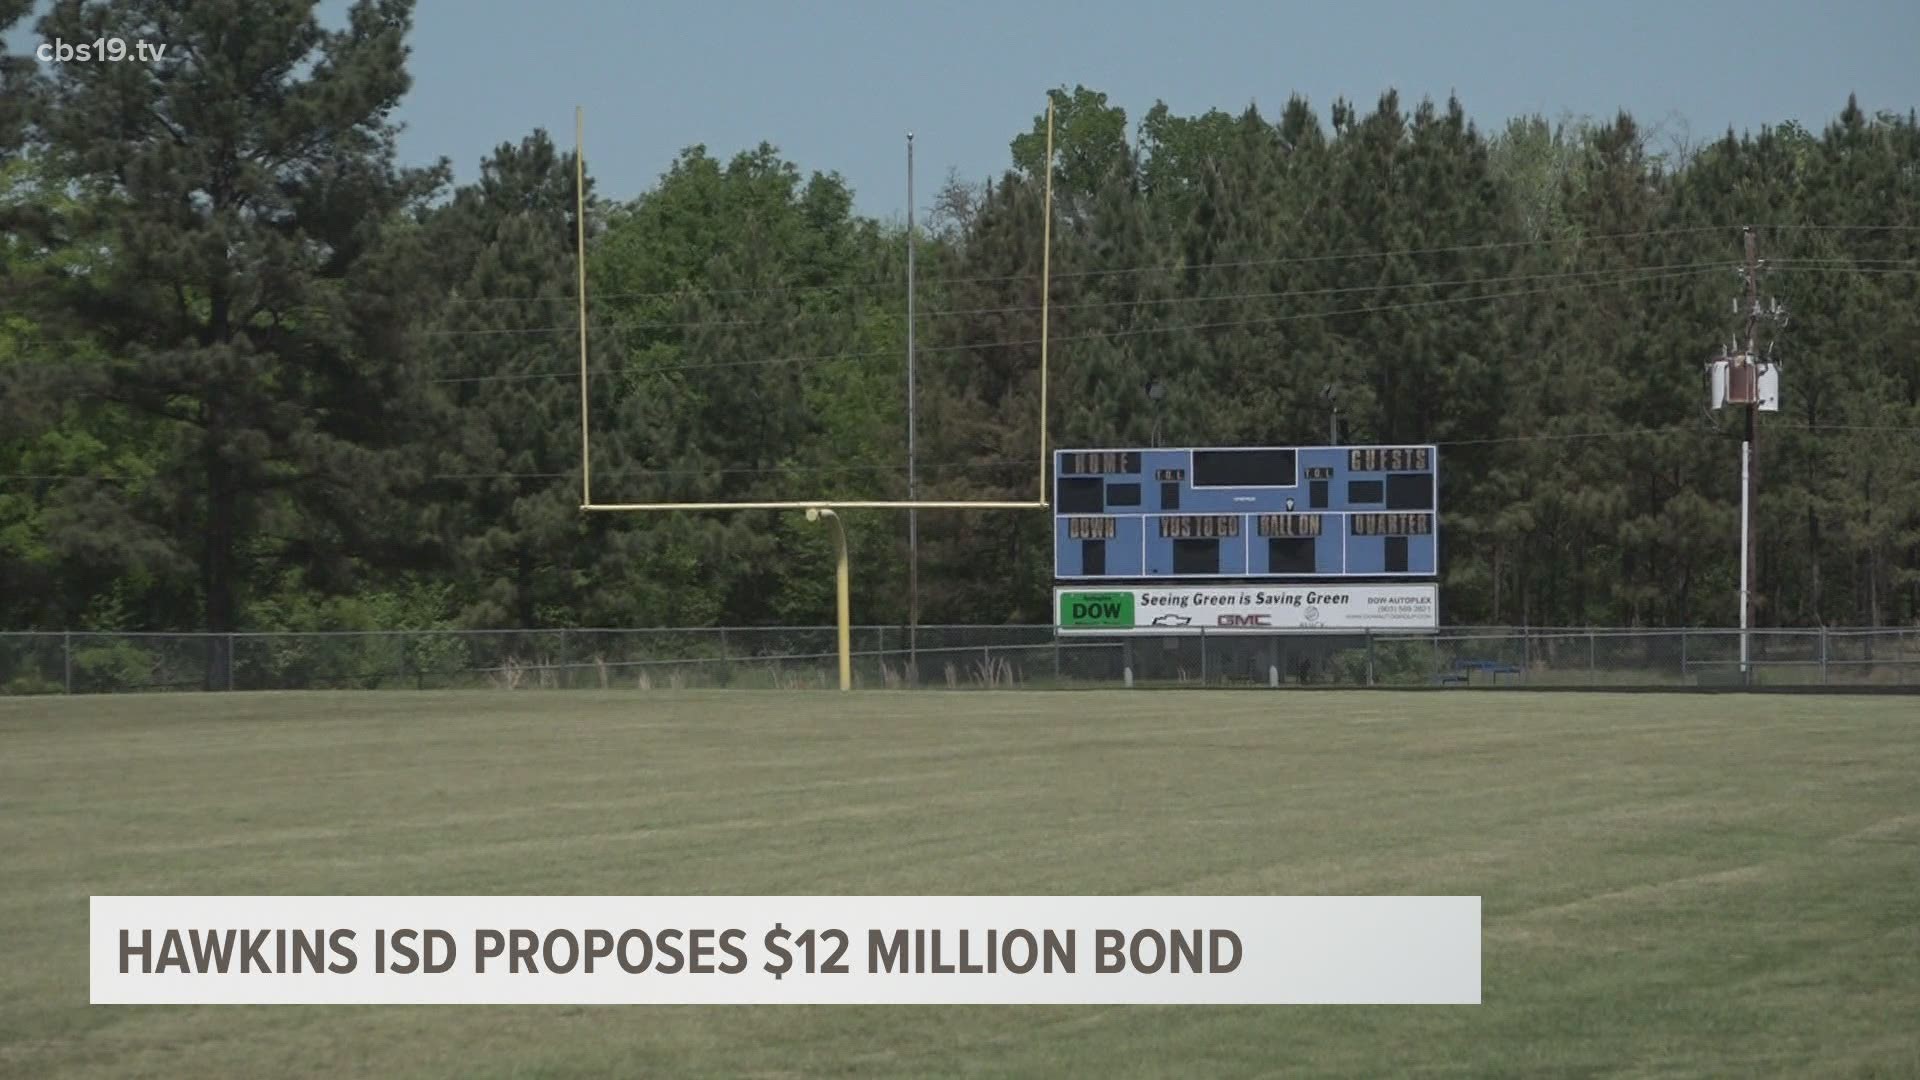 If the bond passes, there will be an increase in property taxes.